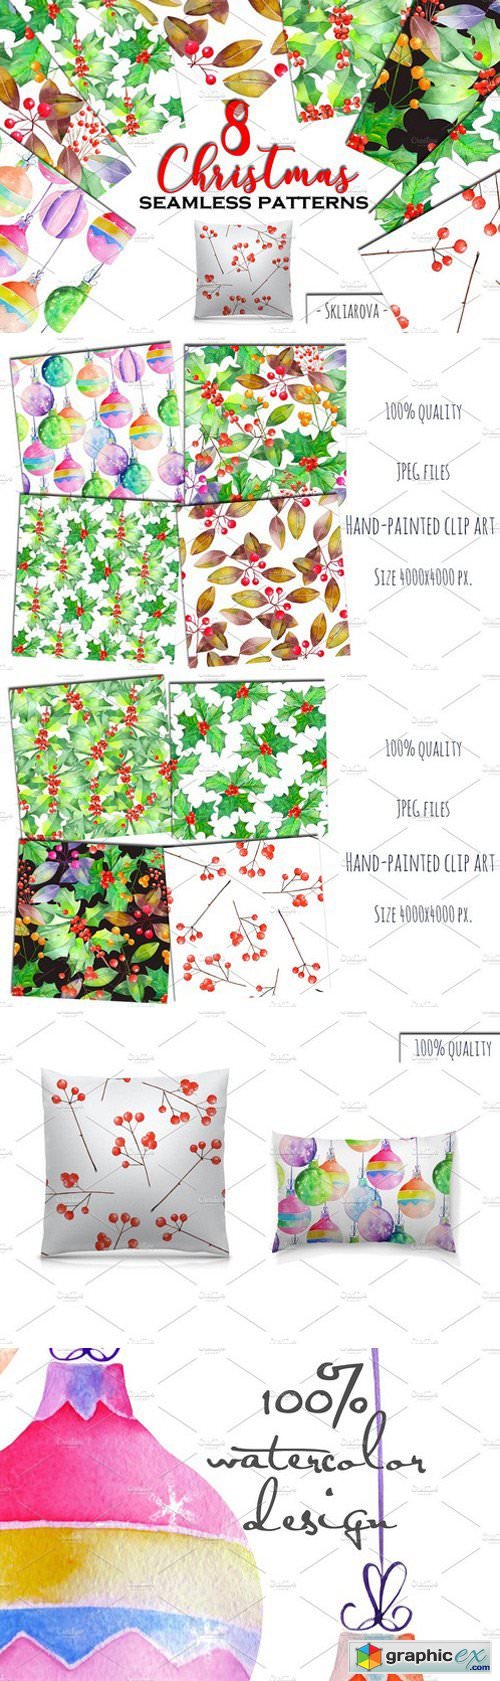 Christmas floral patterns